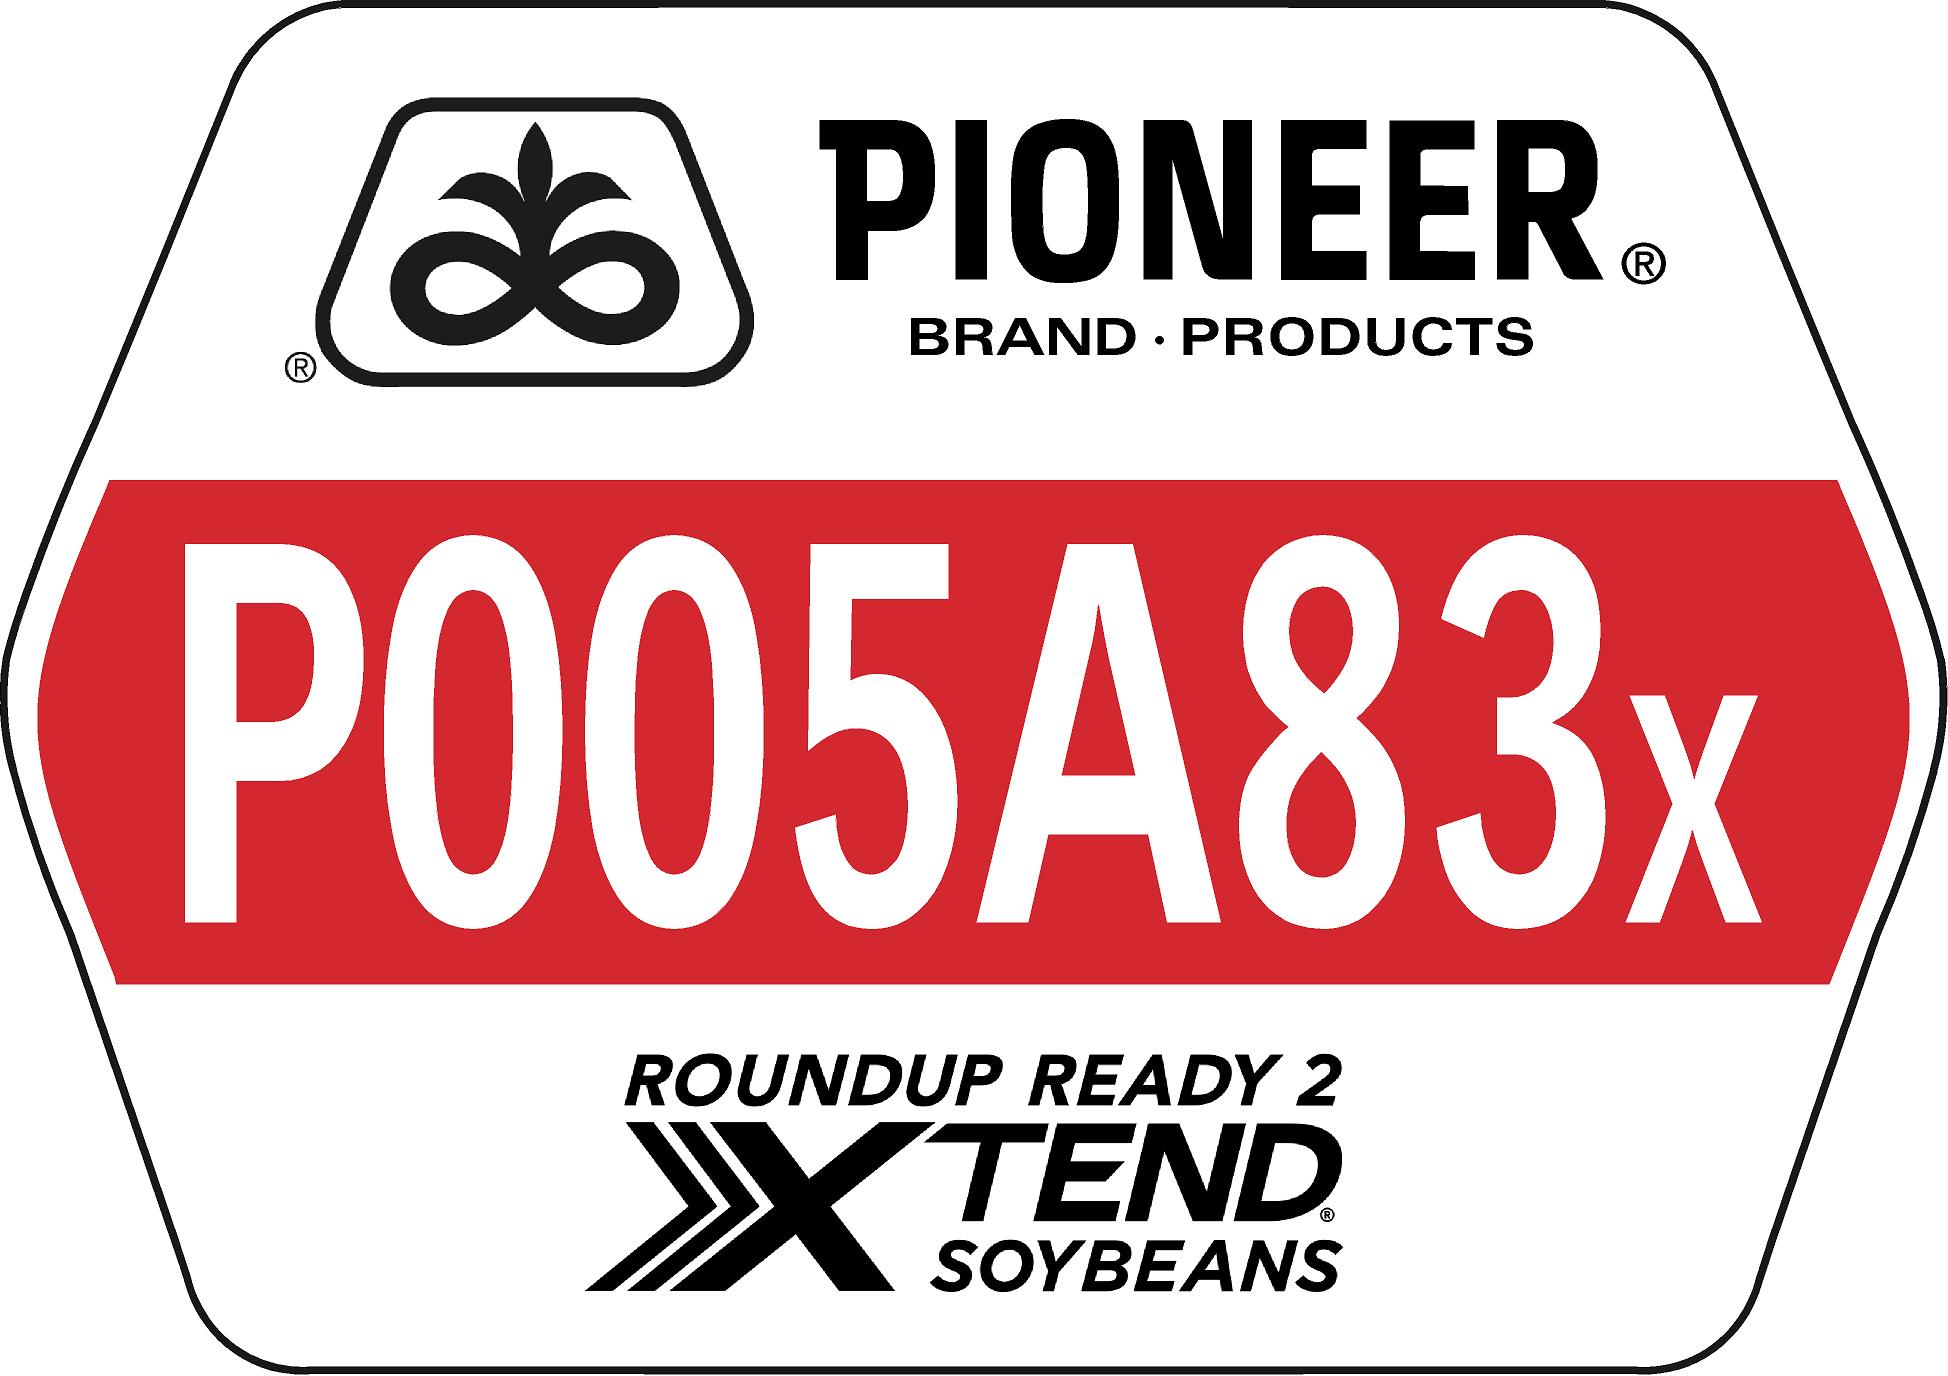 Field Sign > Soybeans > P005A83X